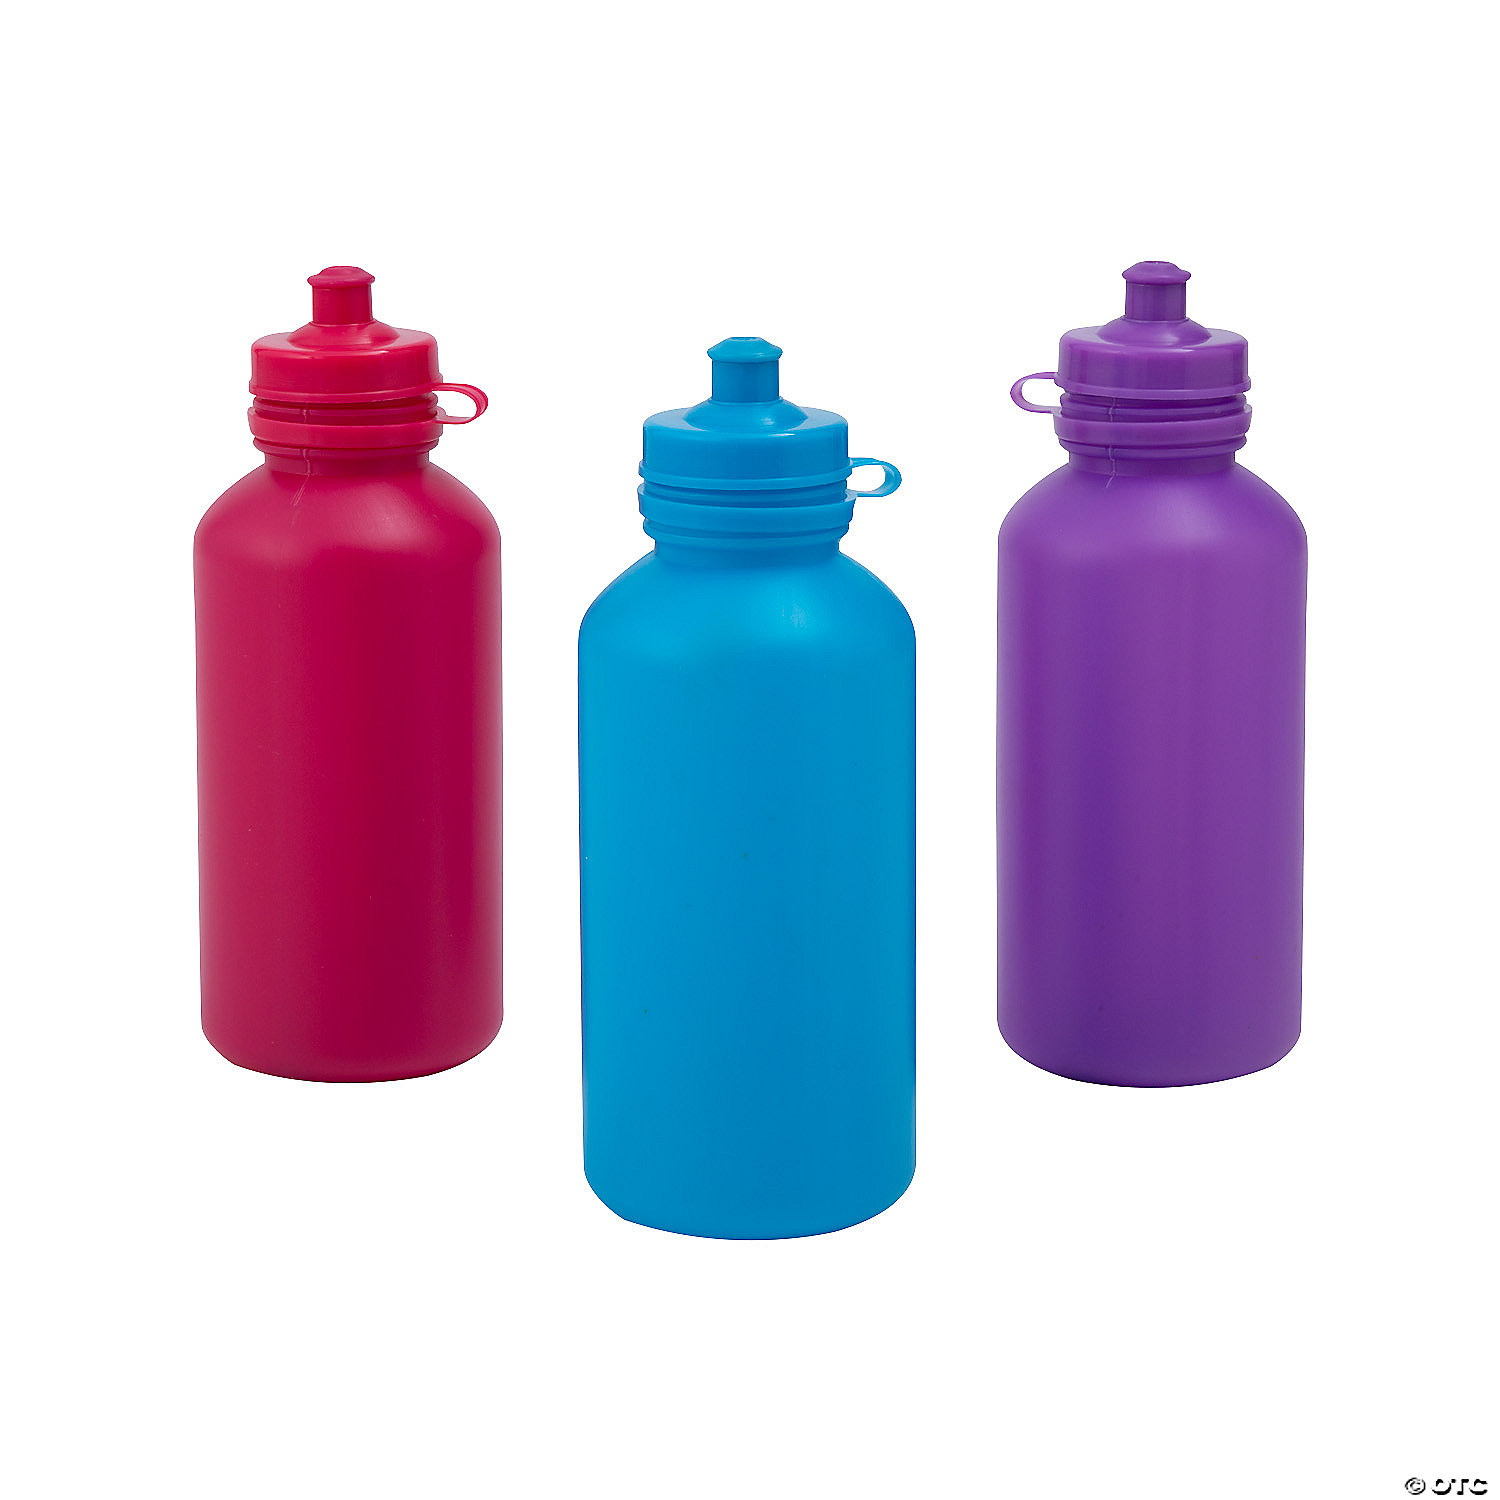 https://openaparty.com/open-a-party-shop/images/bright-bpa-free-plastic-water-bottles~14232434.jpg